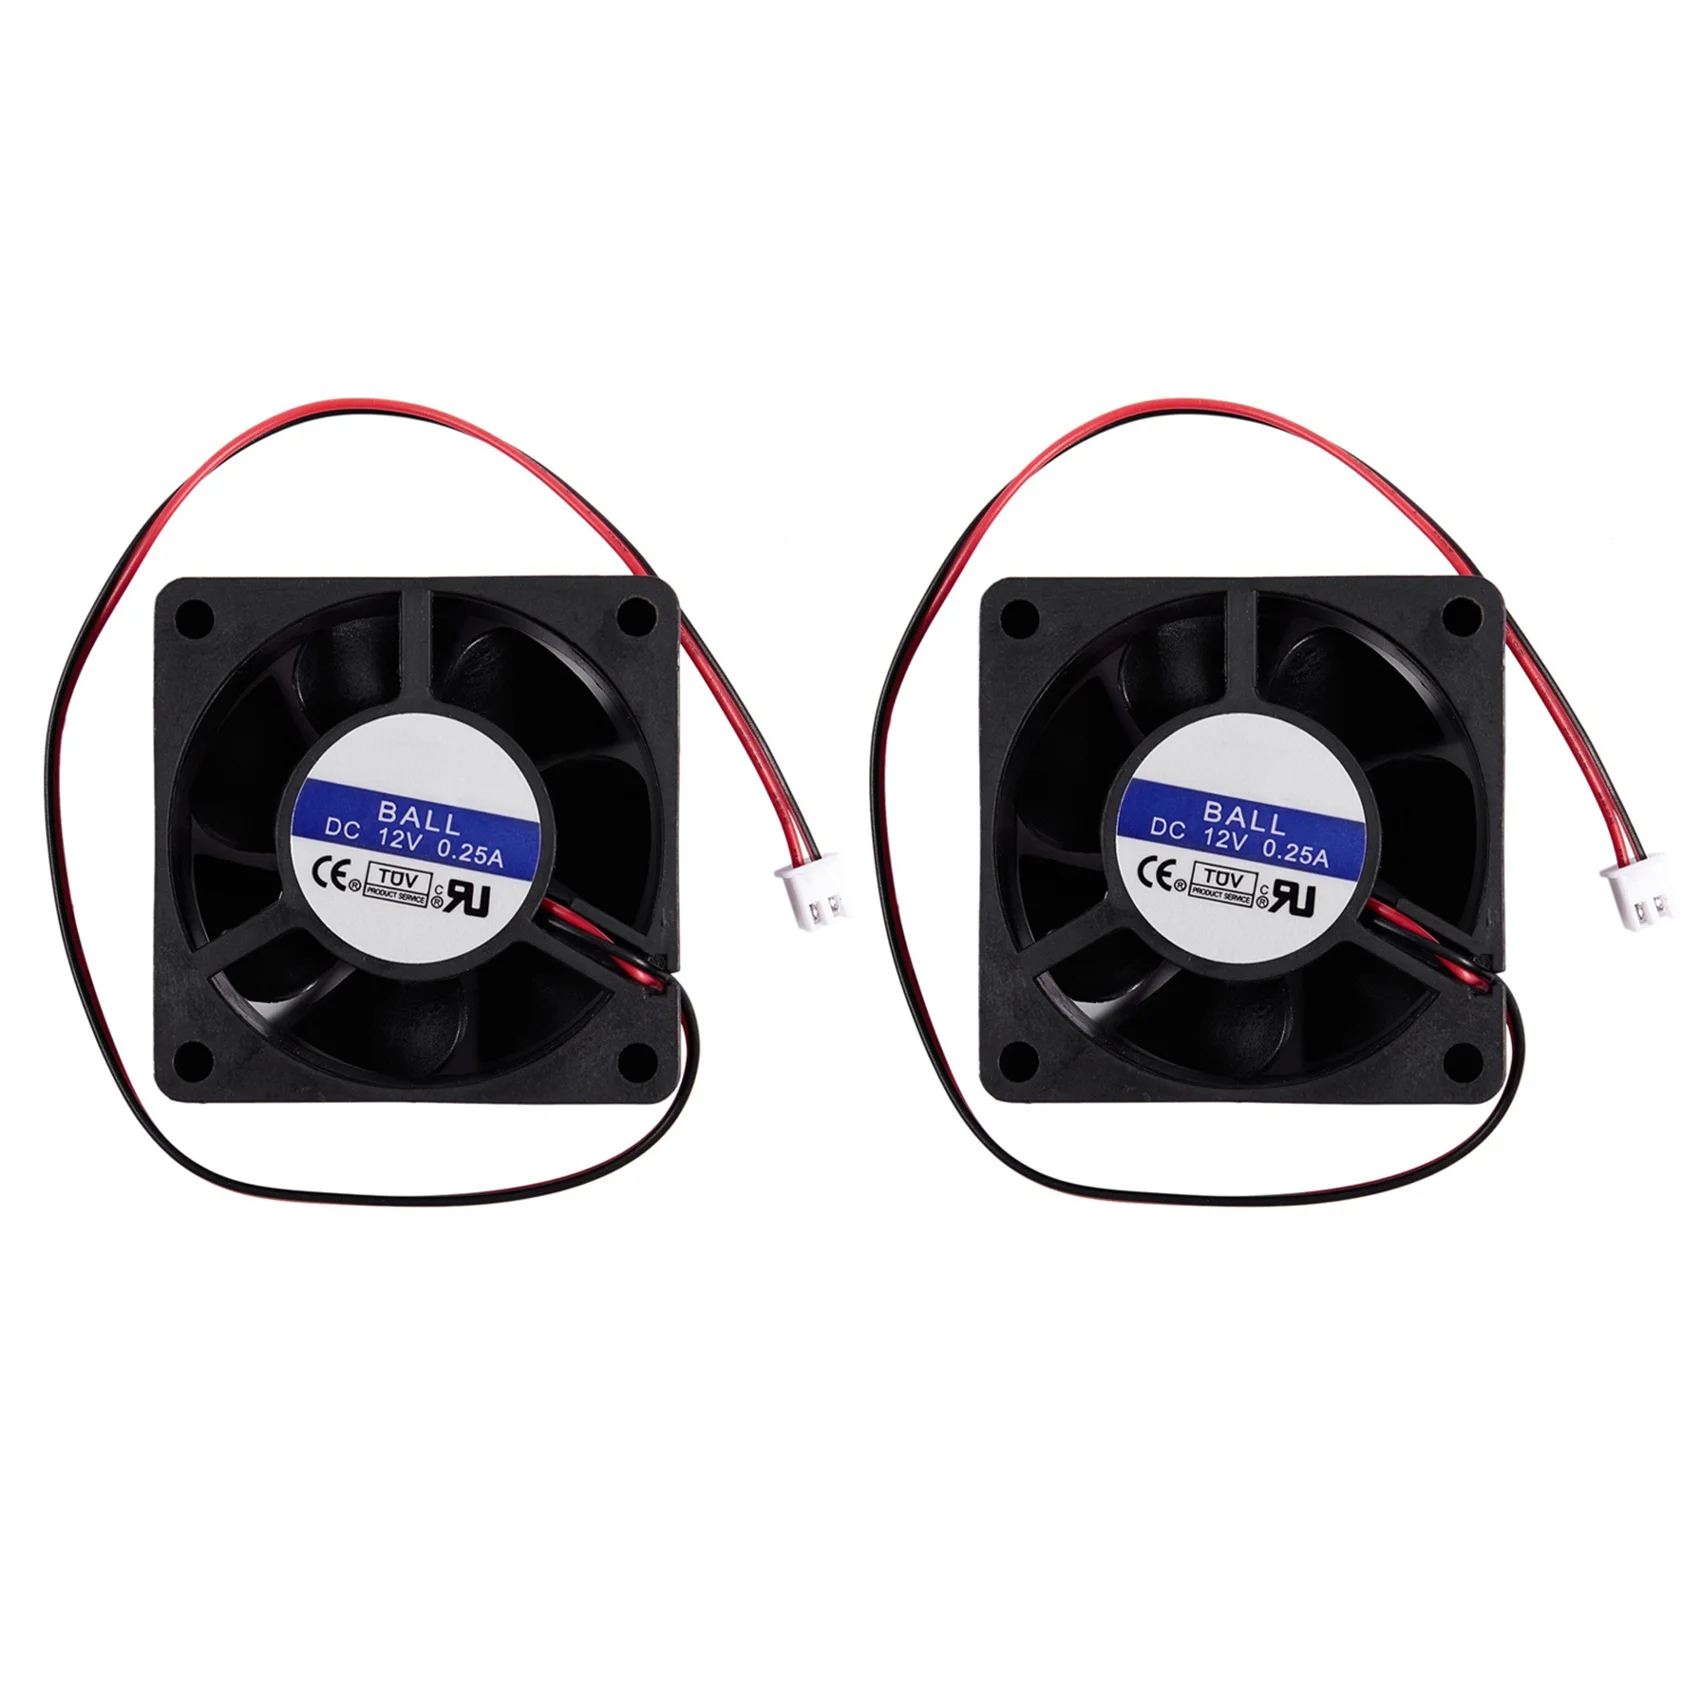 

2X 60mm x 25mm DC 12V 0.25A 2Pin Cooling Fan for Computer Case CPU Cooler